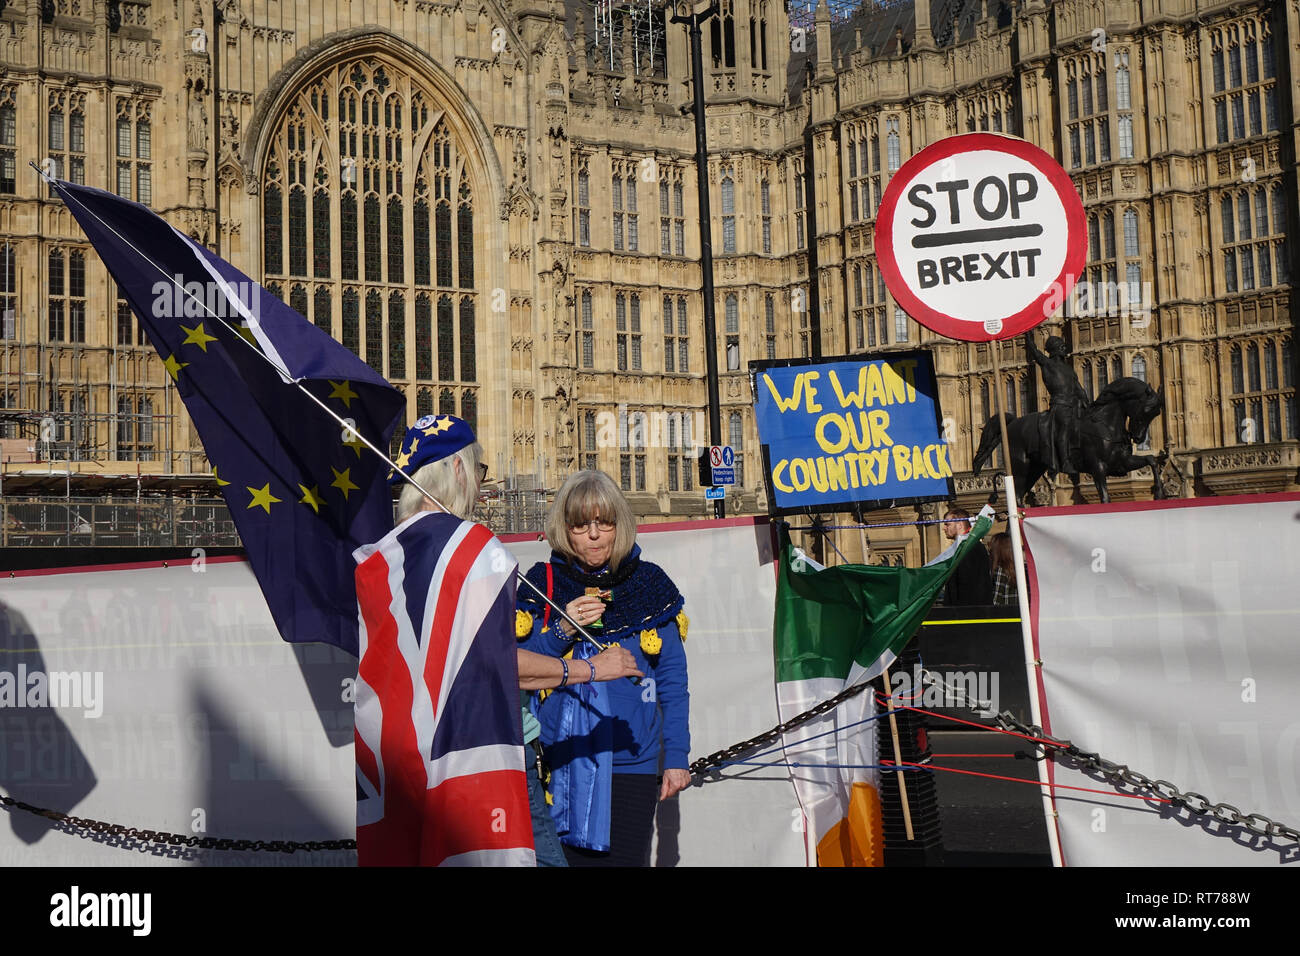 London, UK. 27th Feb, 2019. Anti-Brexit Activist demonstrate opposite Palace Of Westminster in London. Credit: Thomas Krych/Alamy Live News Stock Photo